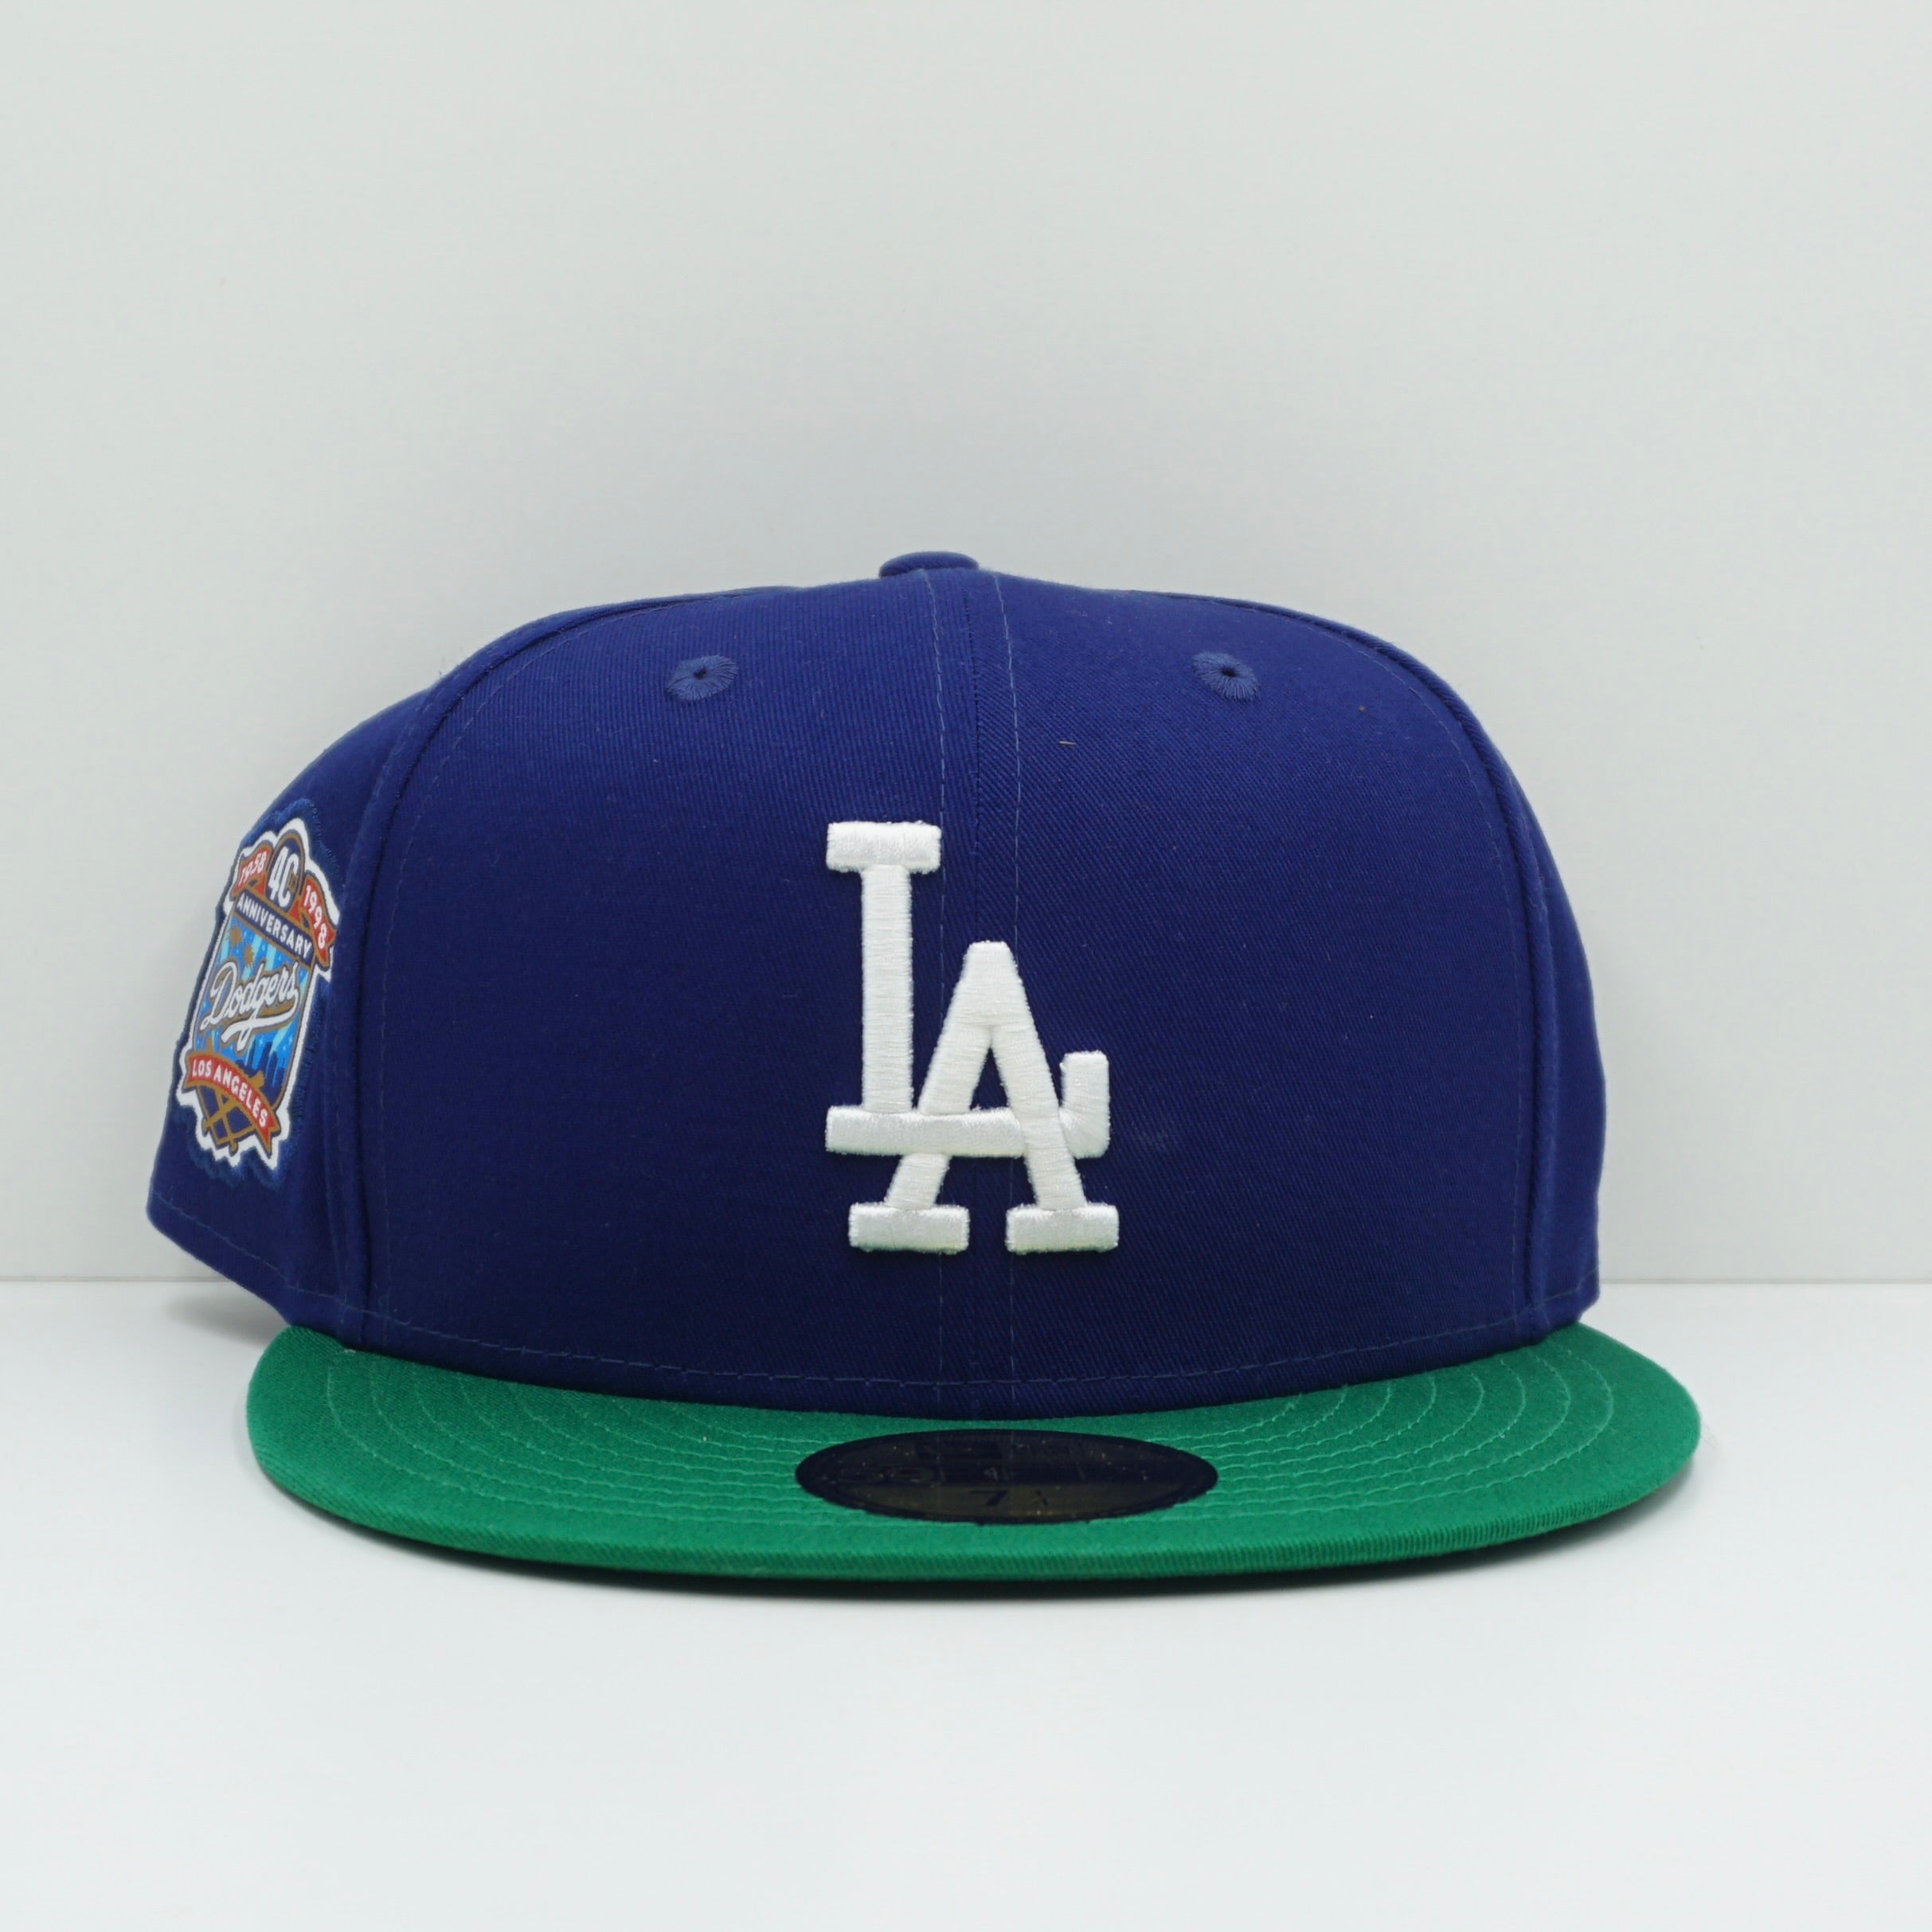 New Era Los Angeles Dodgers Blue Green Fitted Cap